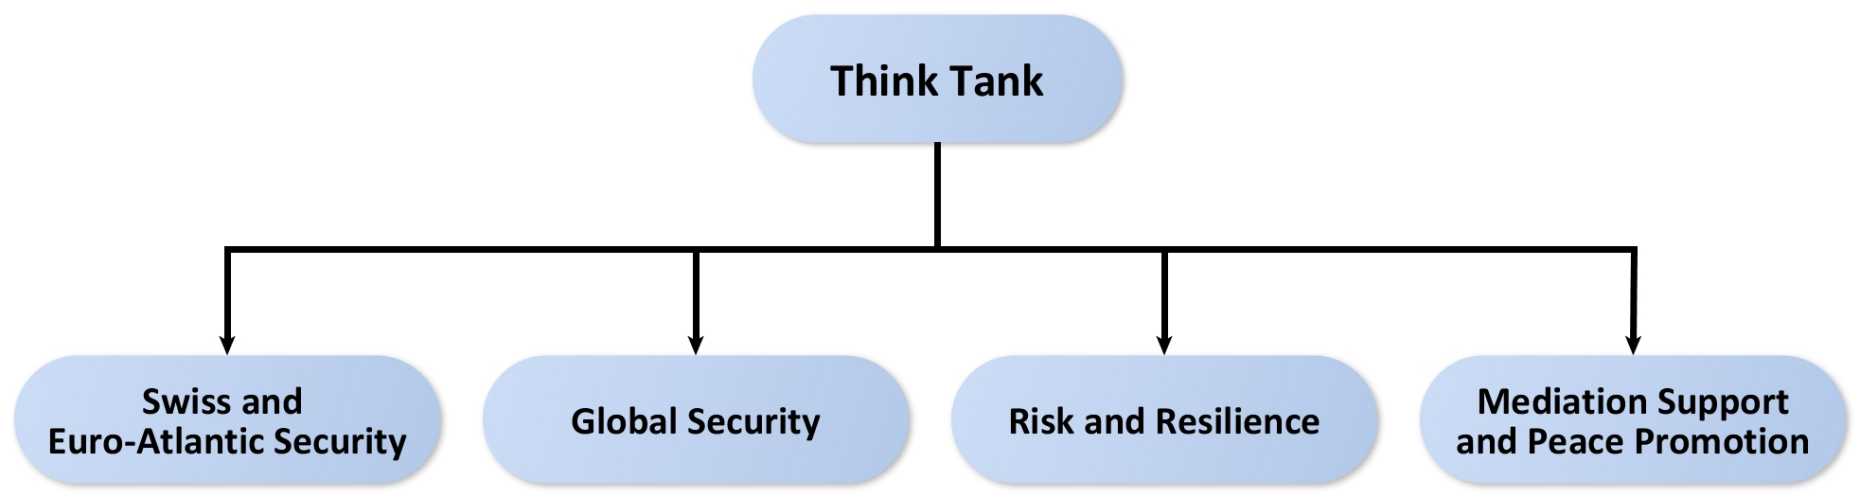 Enlarged view: Think Tank